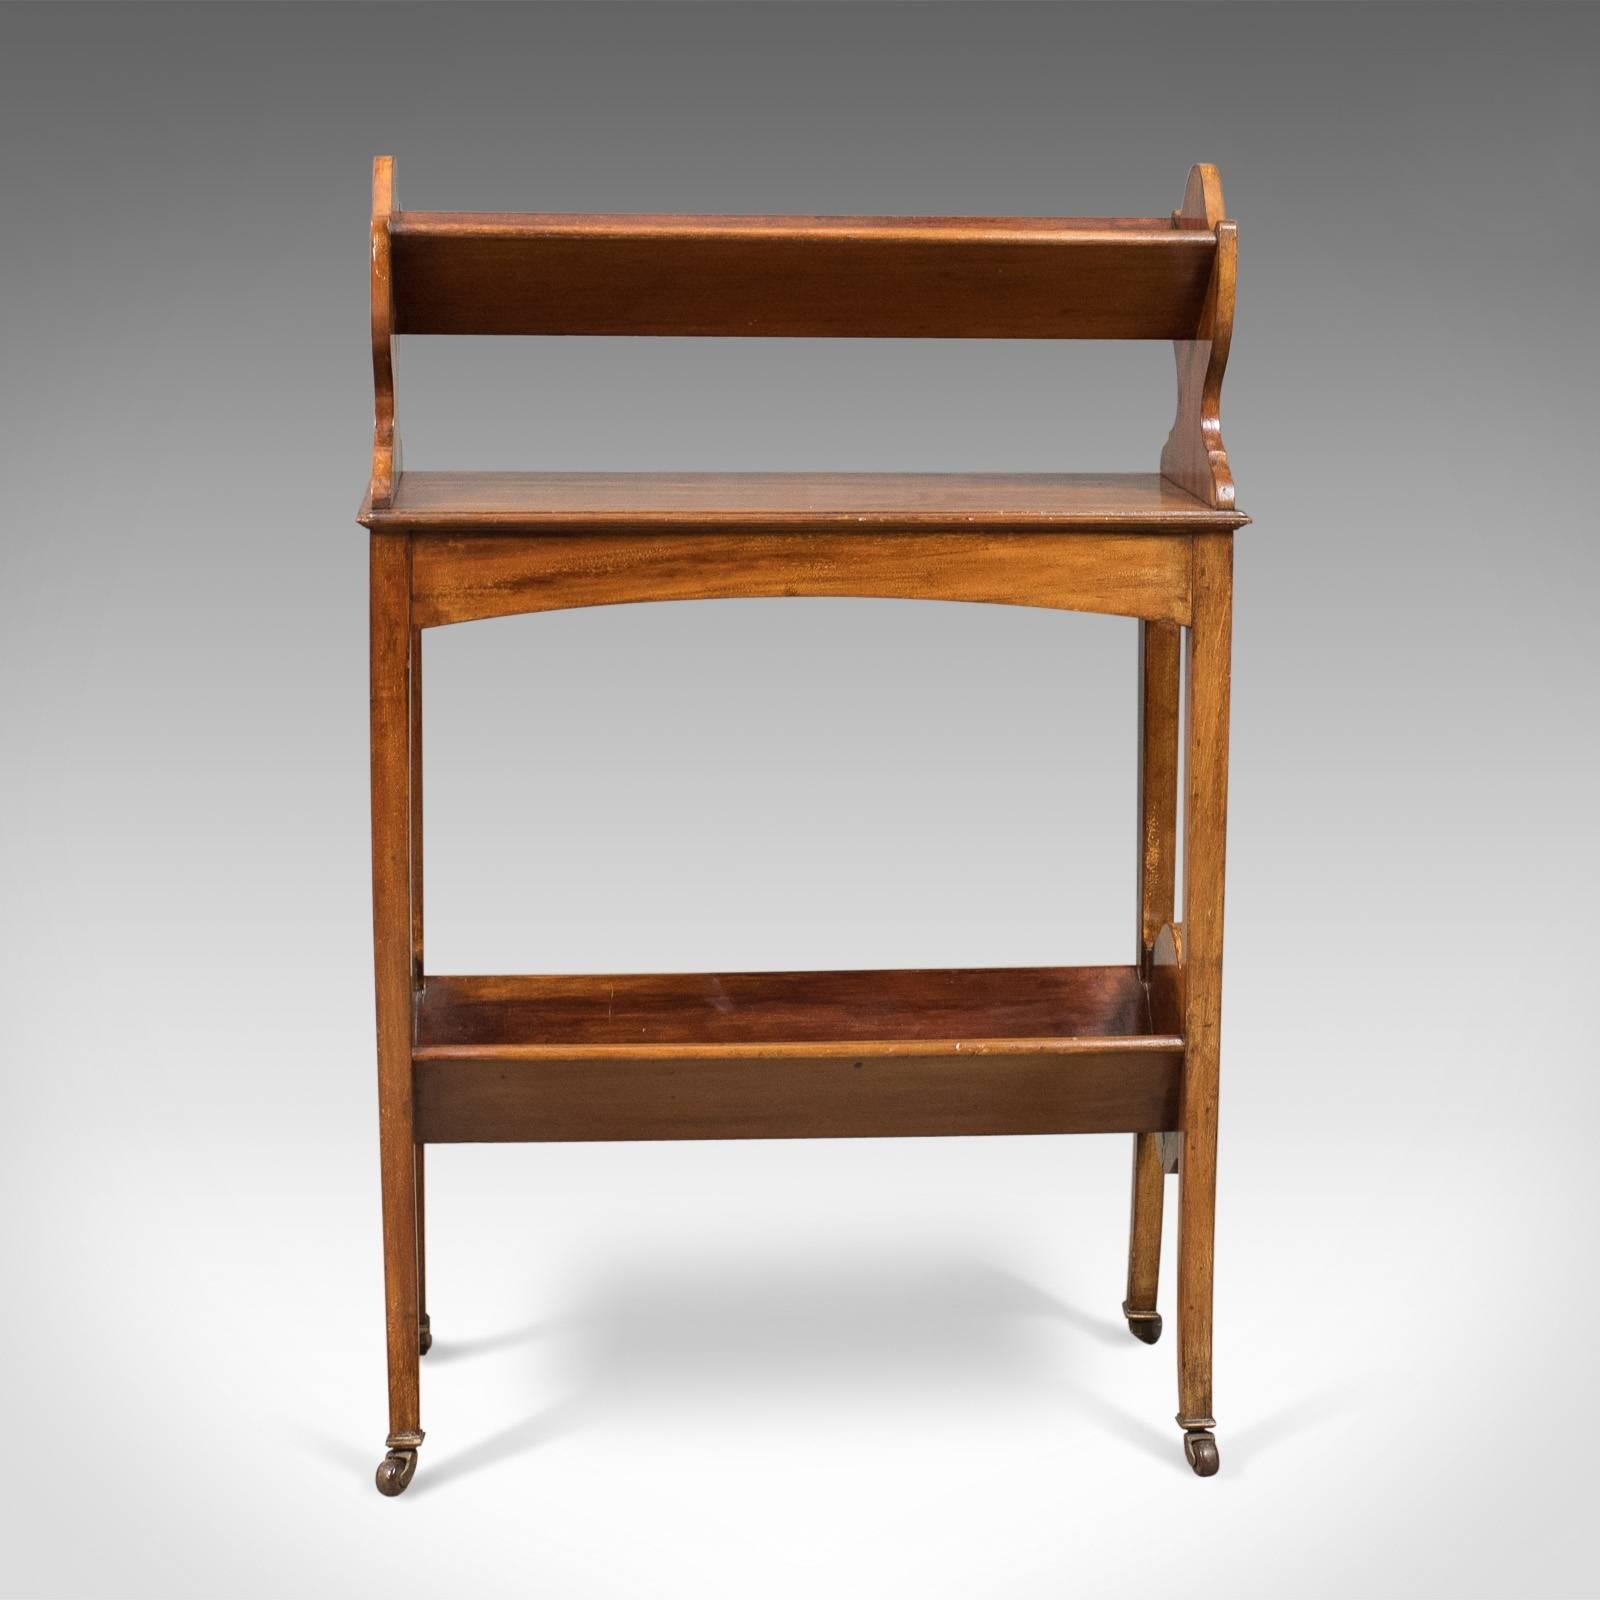 This is an antique bookstand, an English Edwardian mobile book shelf in mahogany dating to circa 1910.

Attractive honey tones and a lustrous finish to the mahogany
Mobile desk companion riding upon original ceramic castors
Offering ample